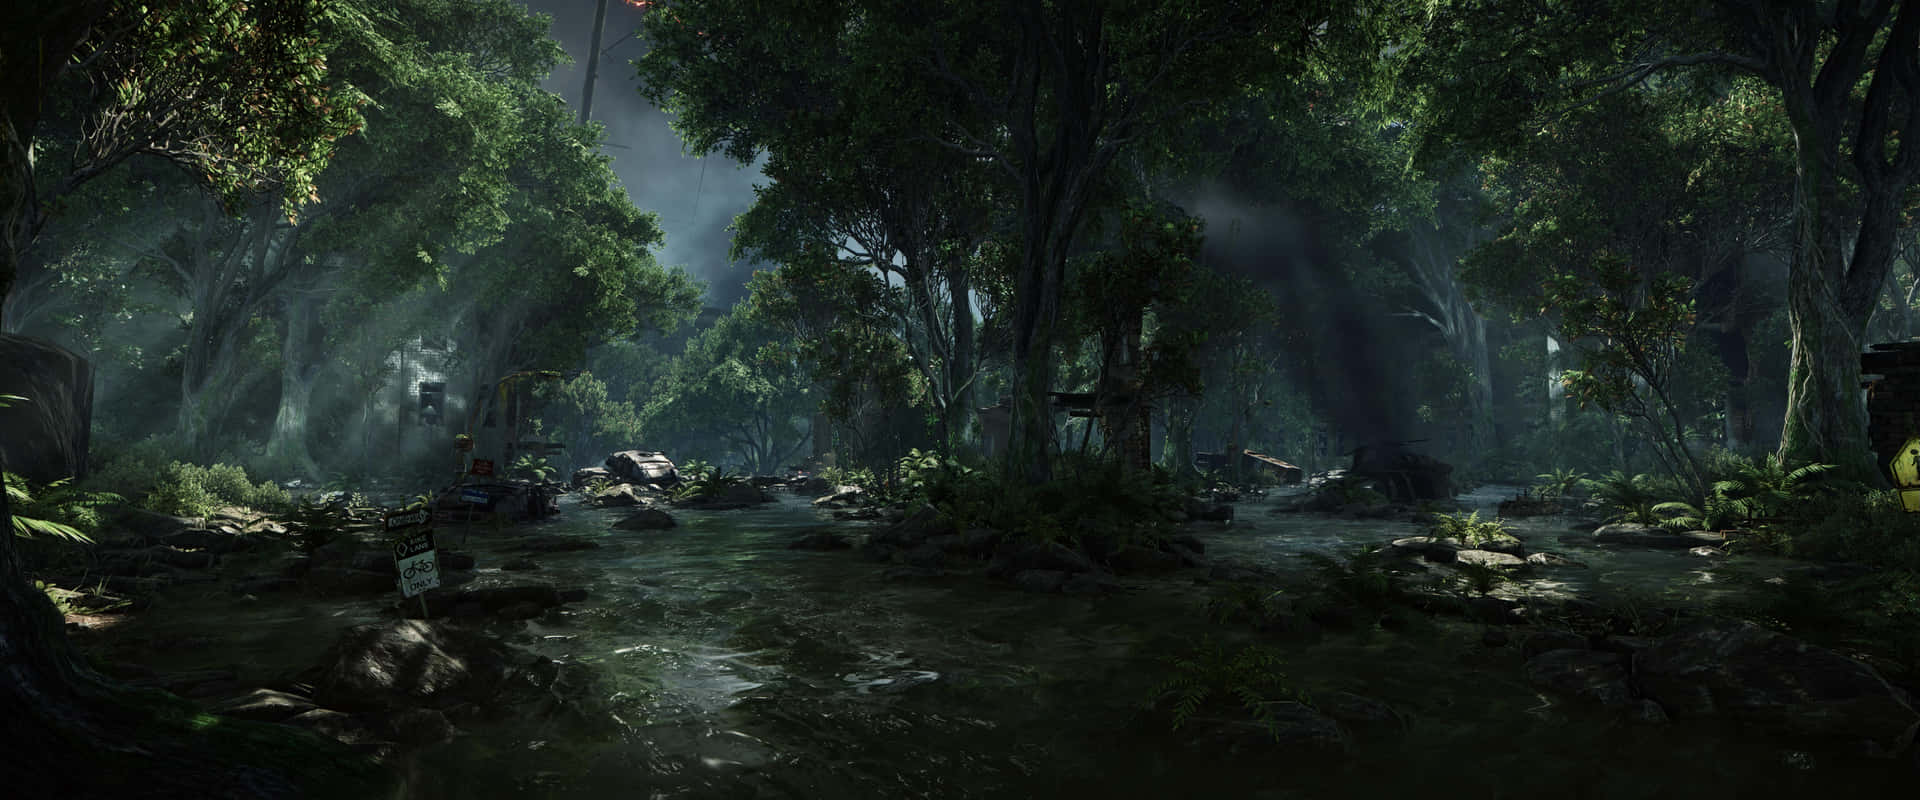 "The Last Bastion of Hope - Crysis 3 City" Wallpaper